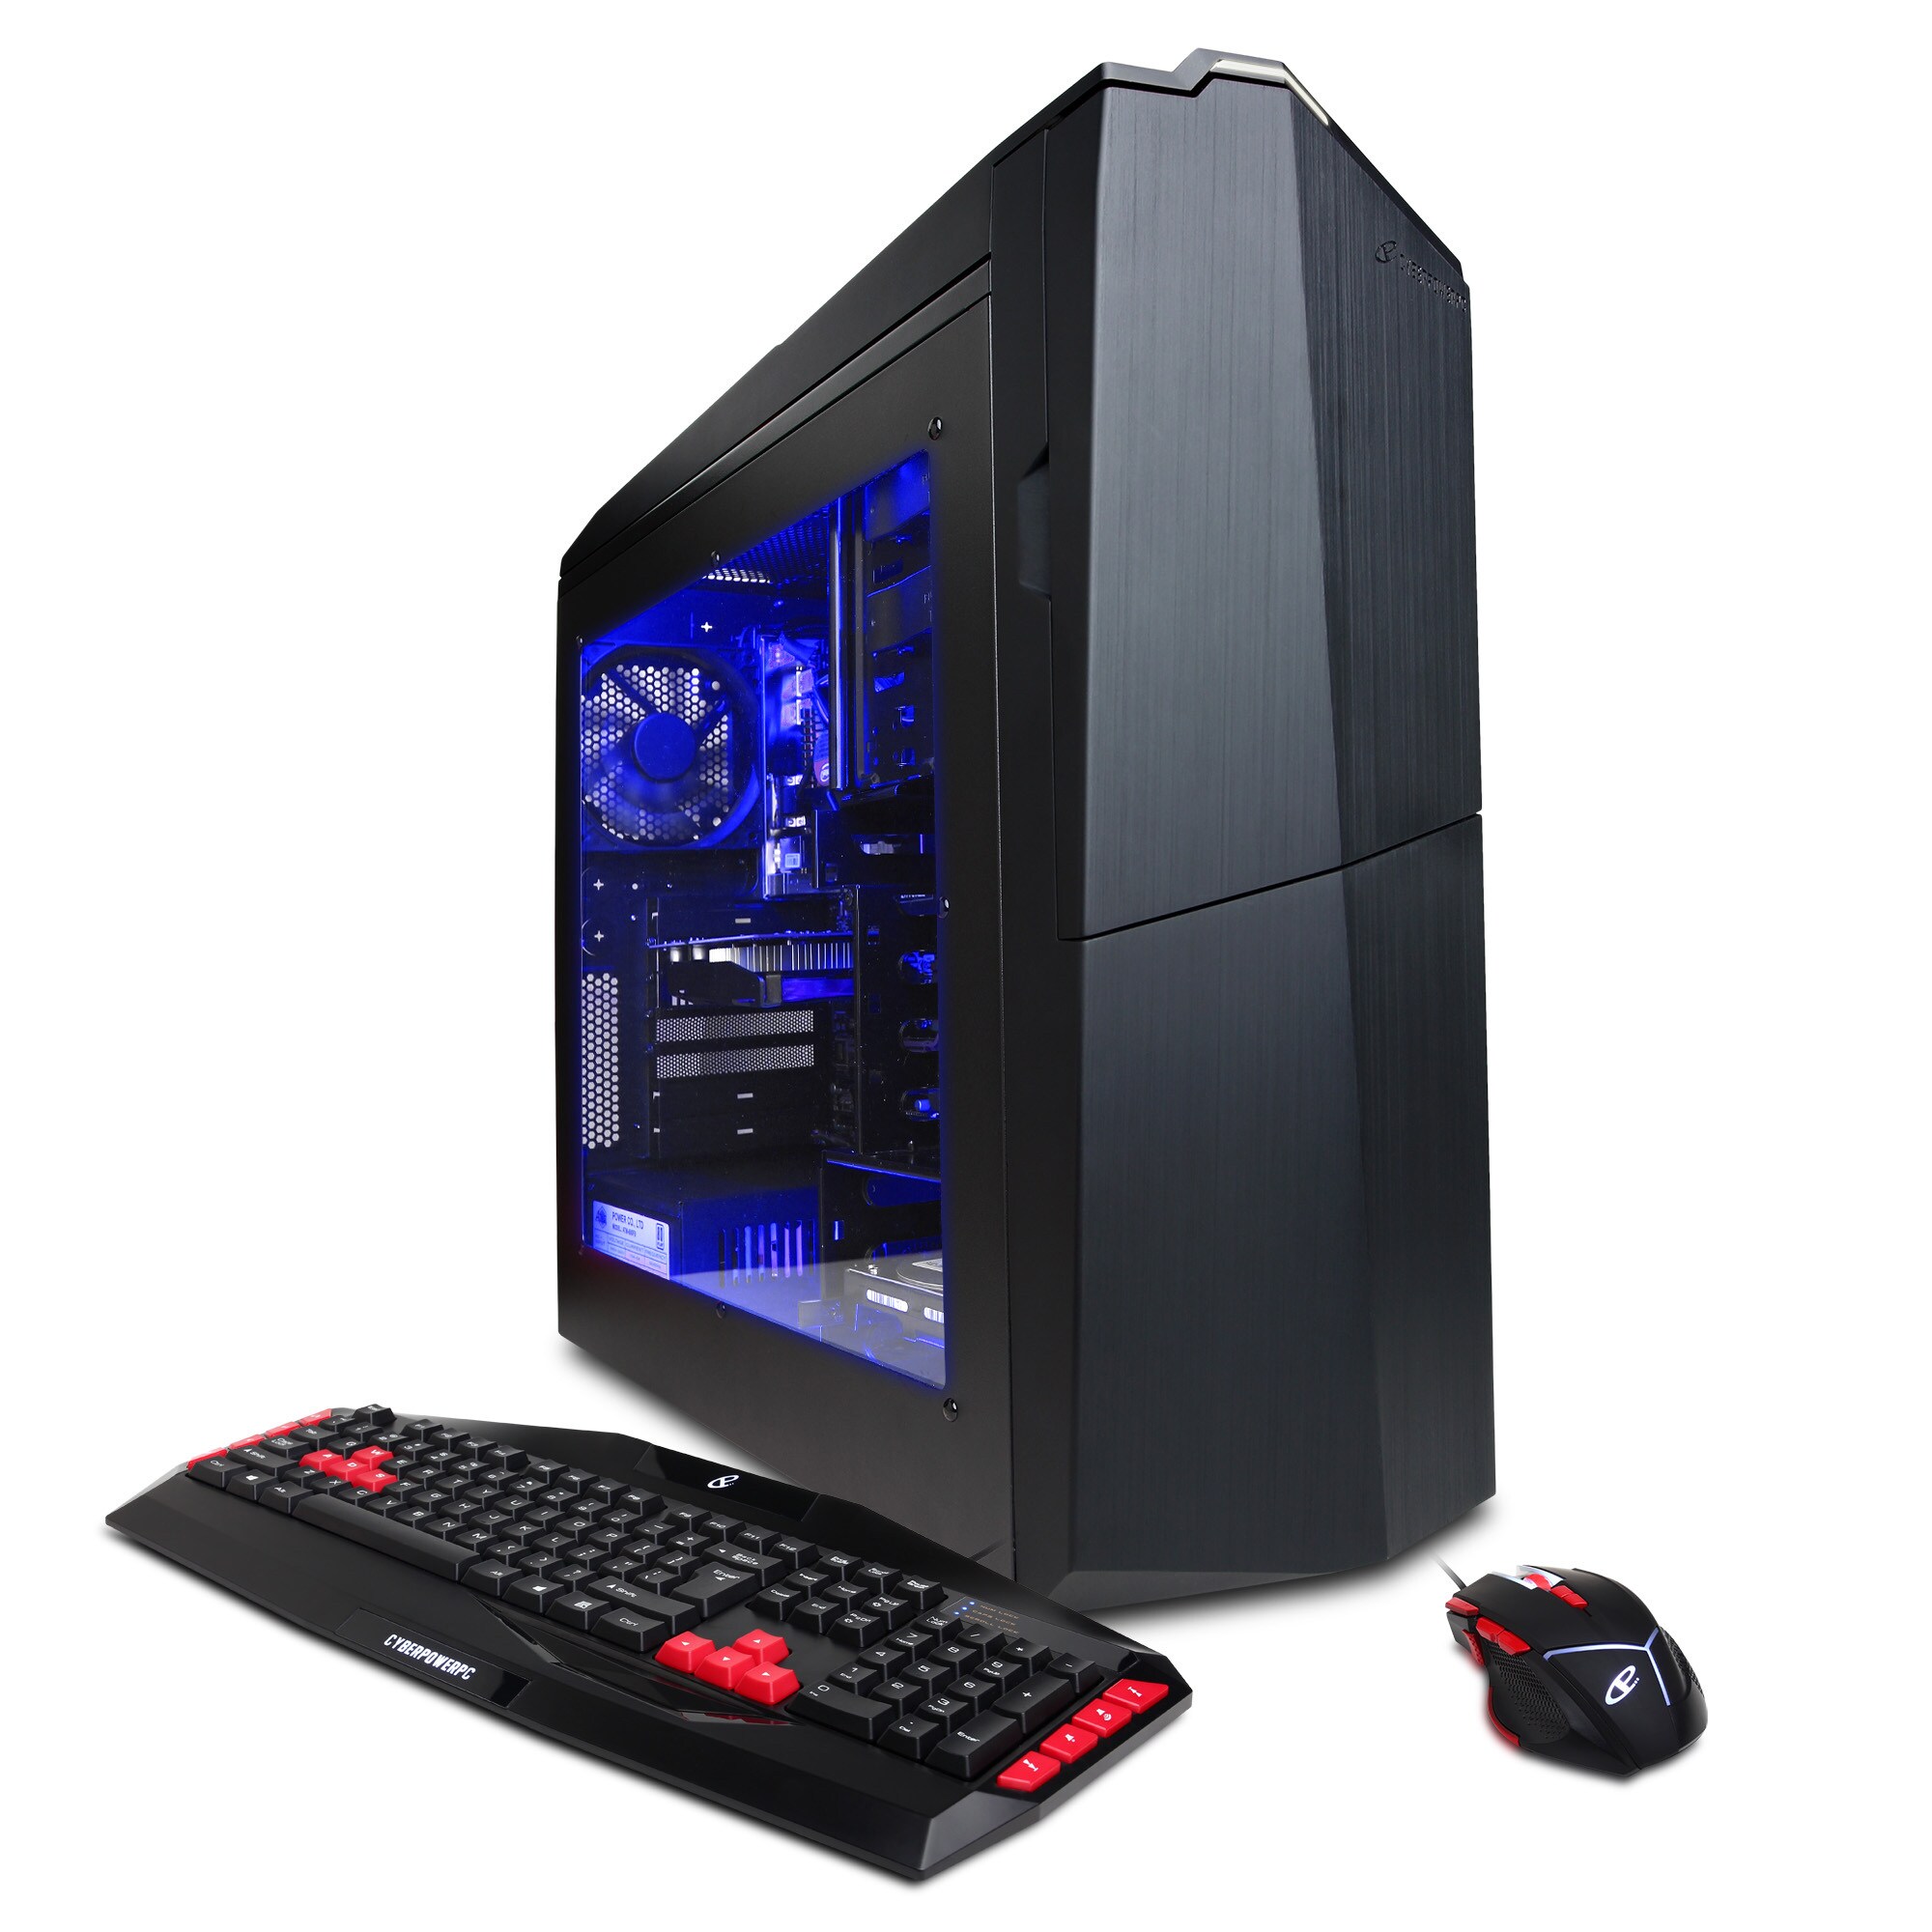 Cyberpowerpc Gamer Xtreme Gxi9400os 3 4ghz Intel Core I7 16b Ram 2tb Hdd Windows 10 Gaming Computer Overstock